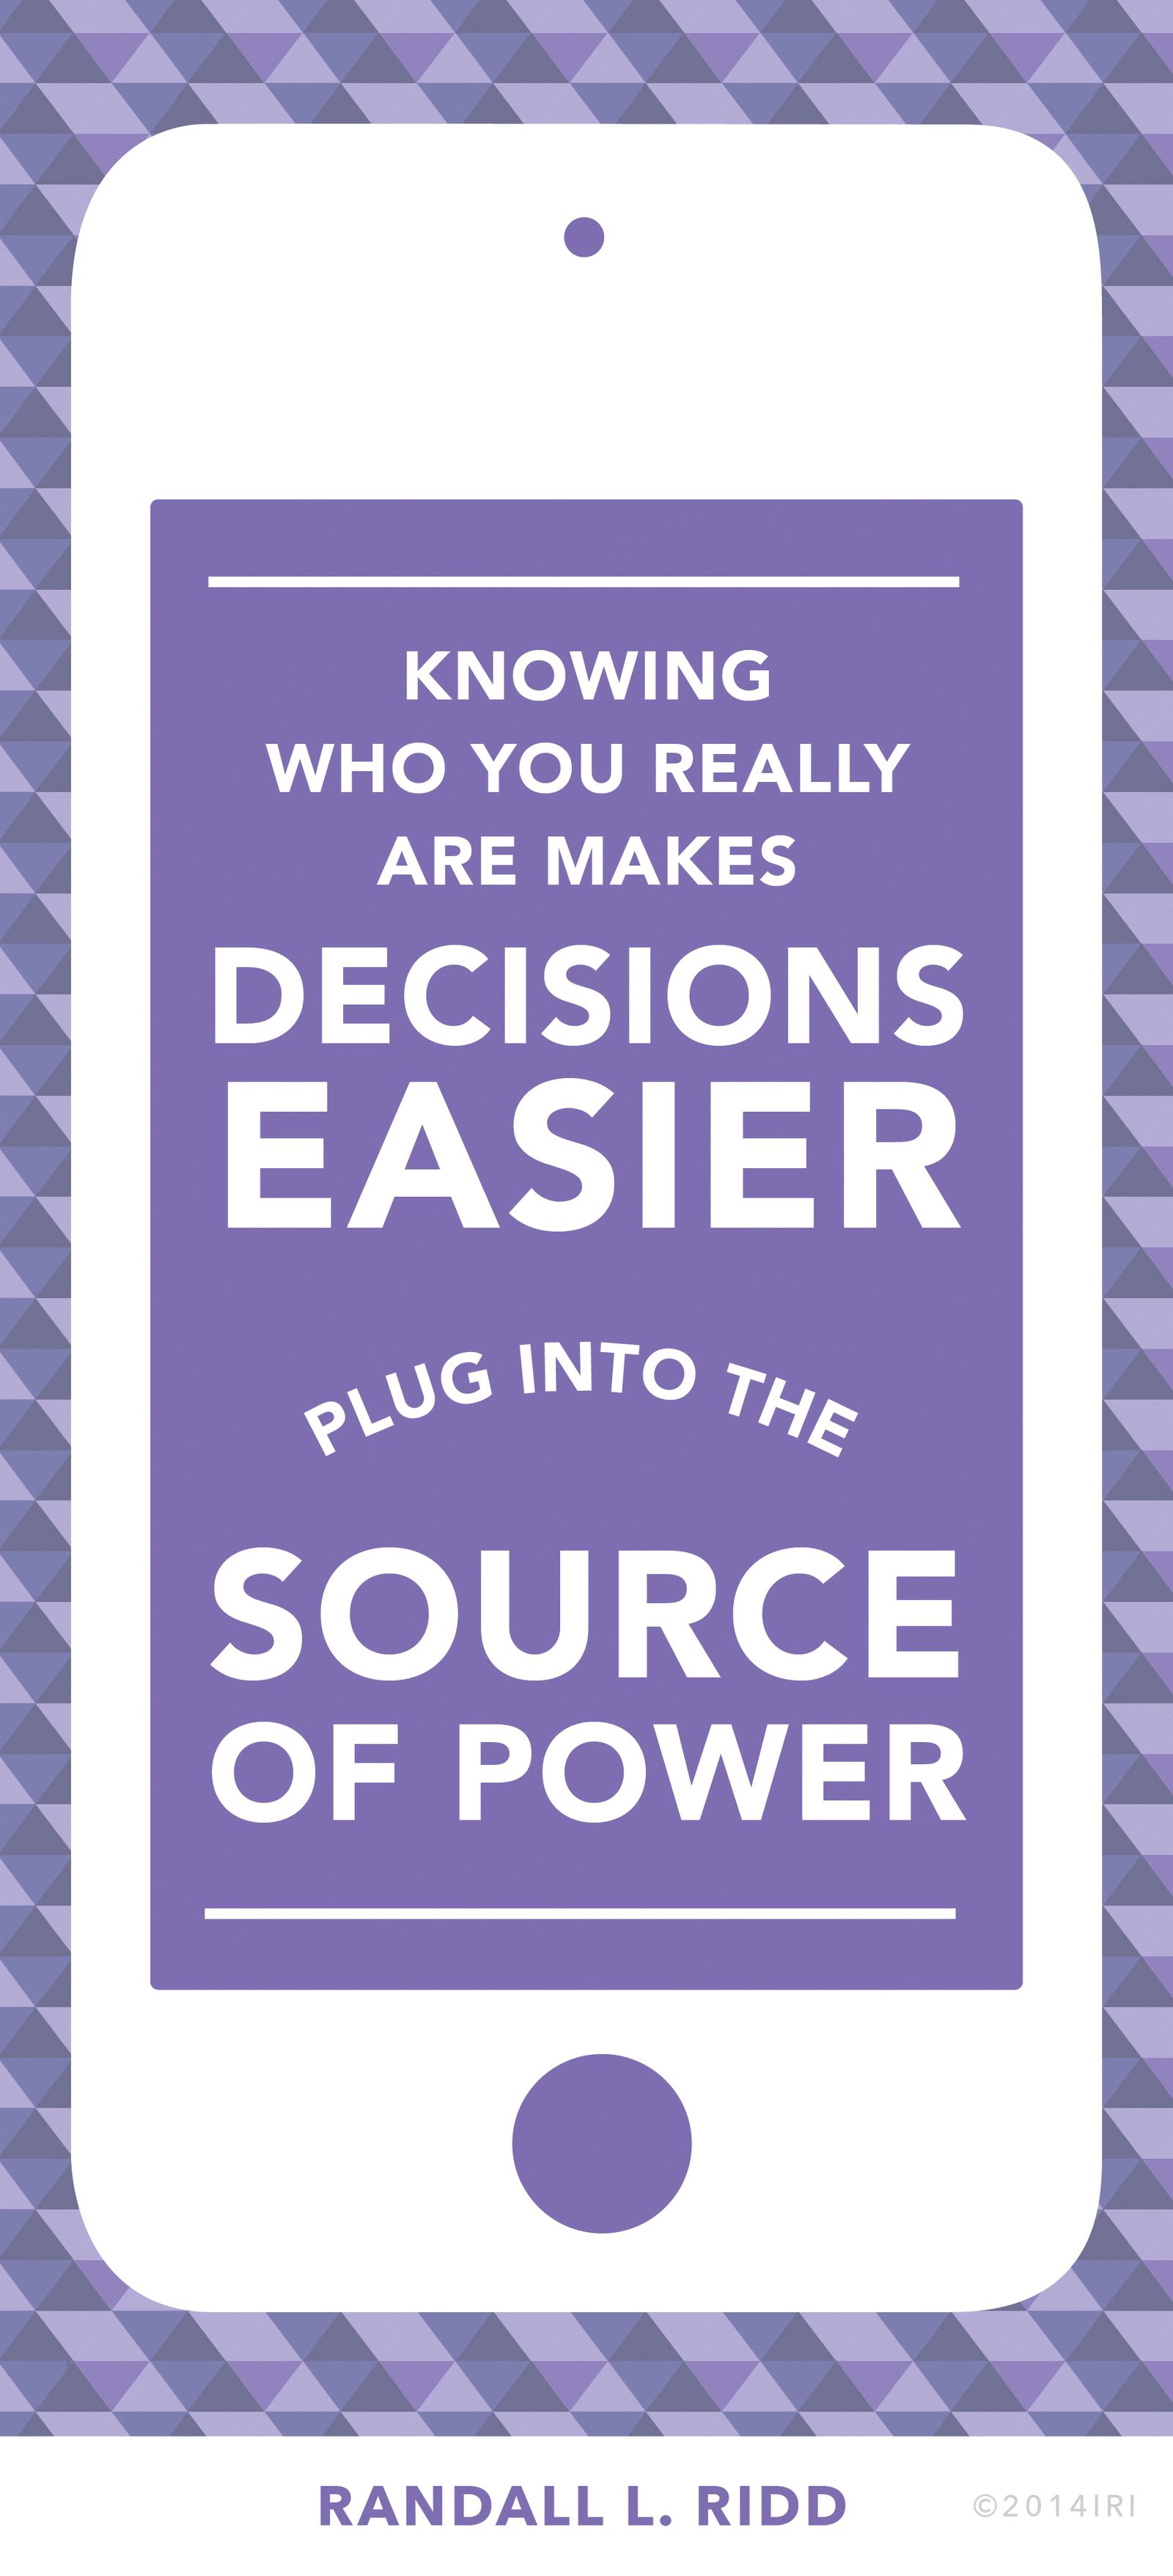 “Knowing who you really are makes decisions easier. Plug into the source of power.”—Brother Randall L. Ridd, “The Choice Generation”